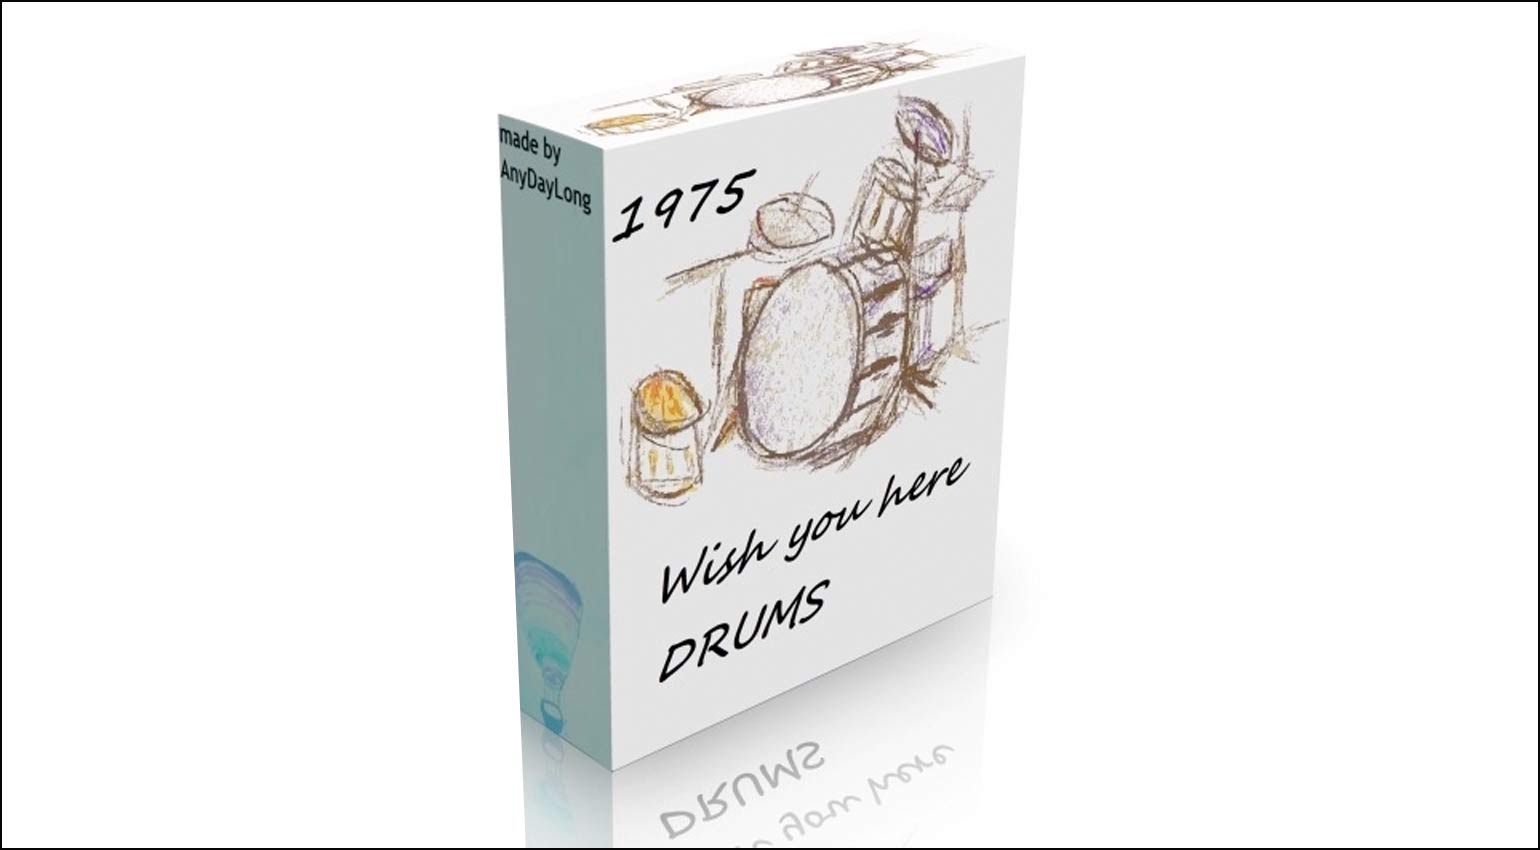 AnyDayLong Wish You Here '75 Drums